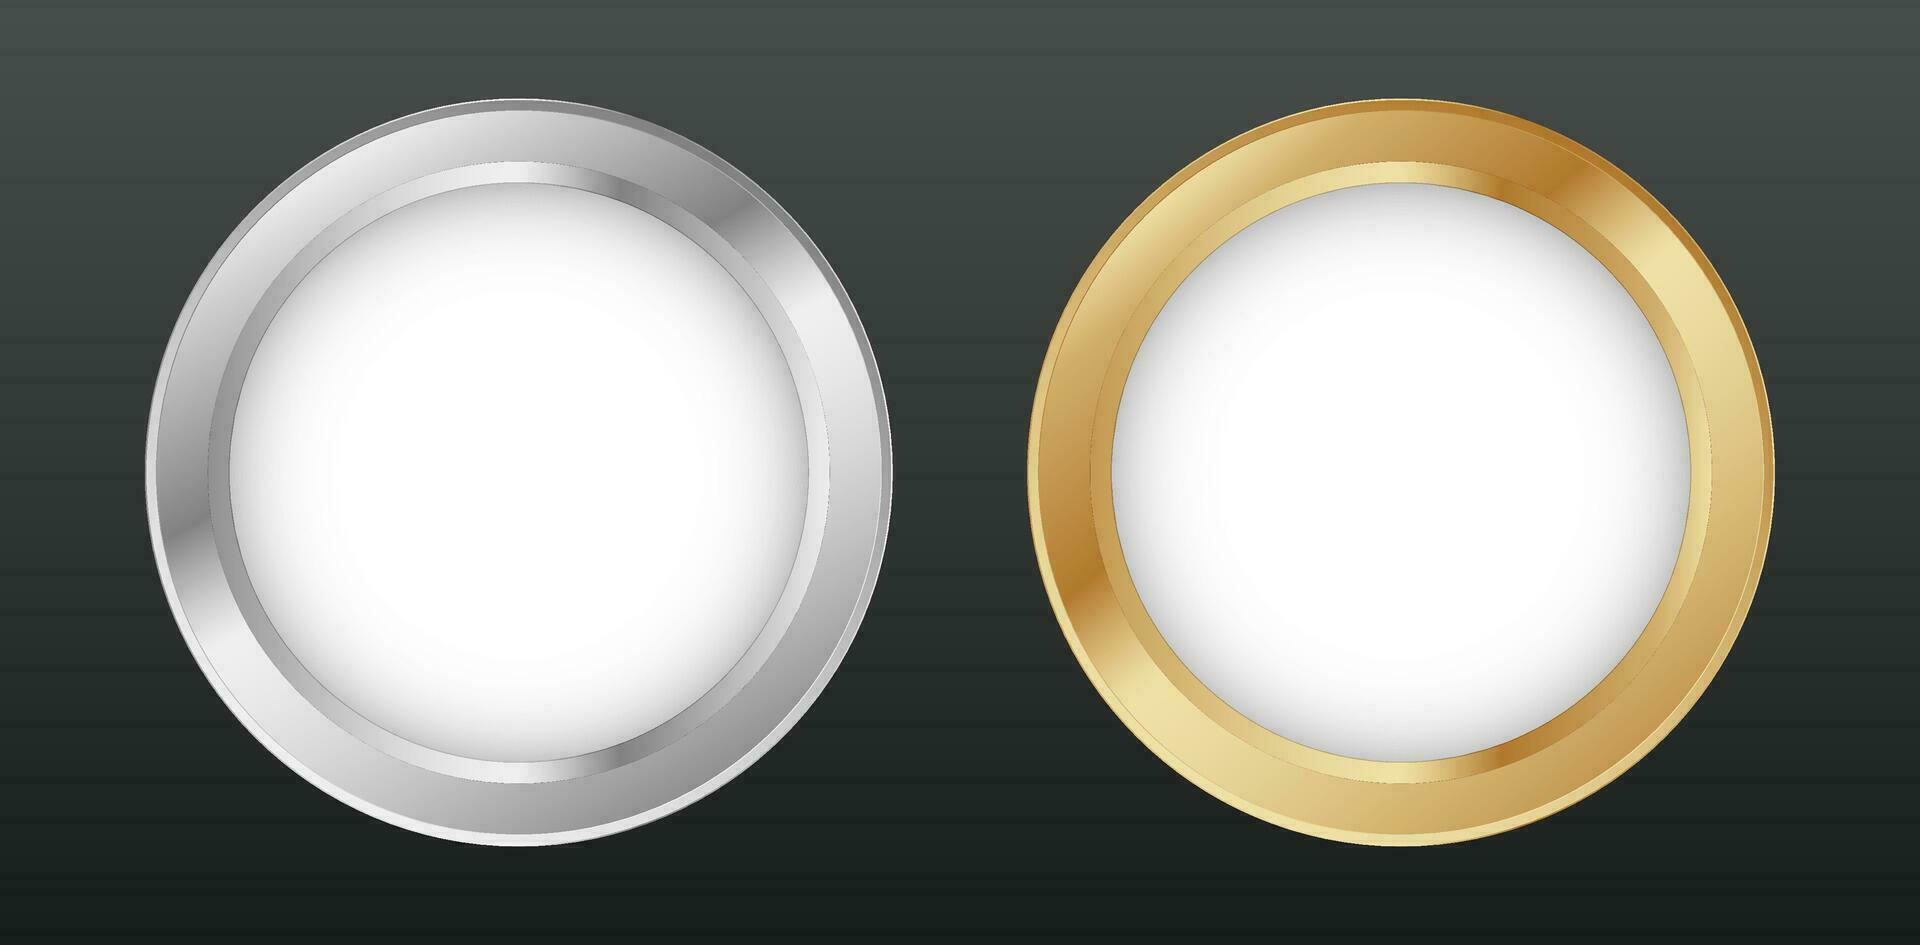 Golden and metal circle photo frame vector. Round gold ring vector